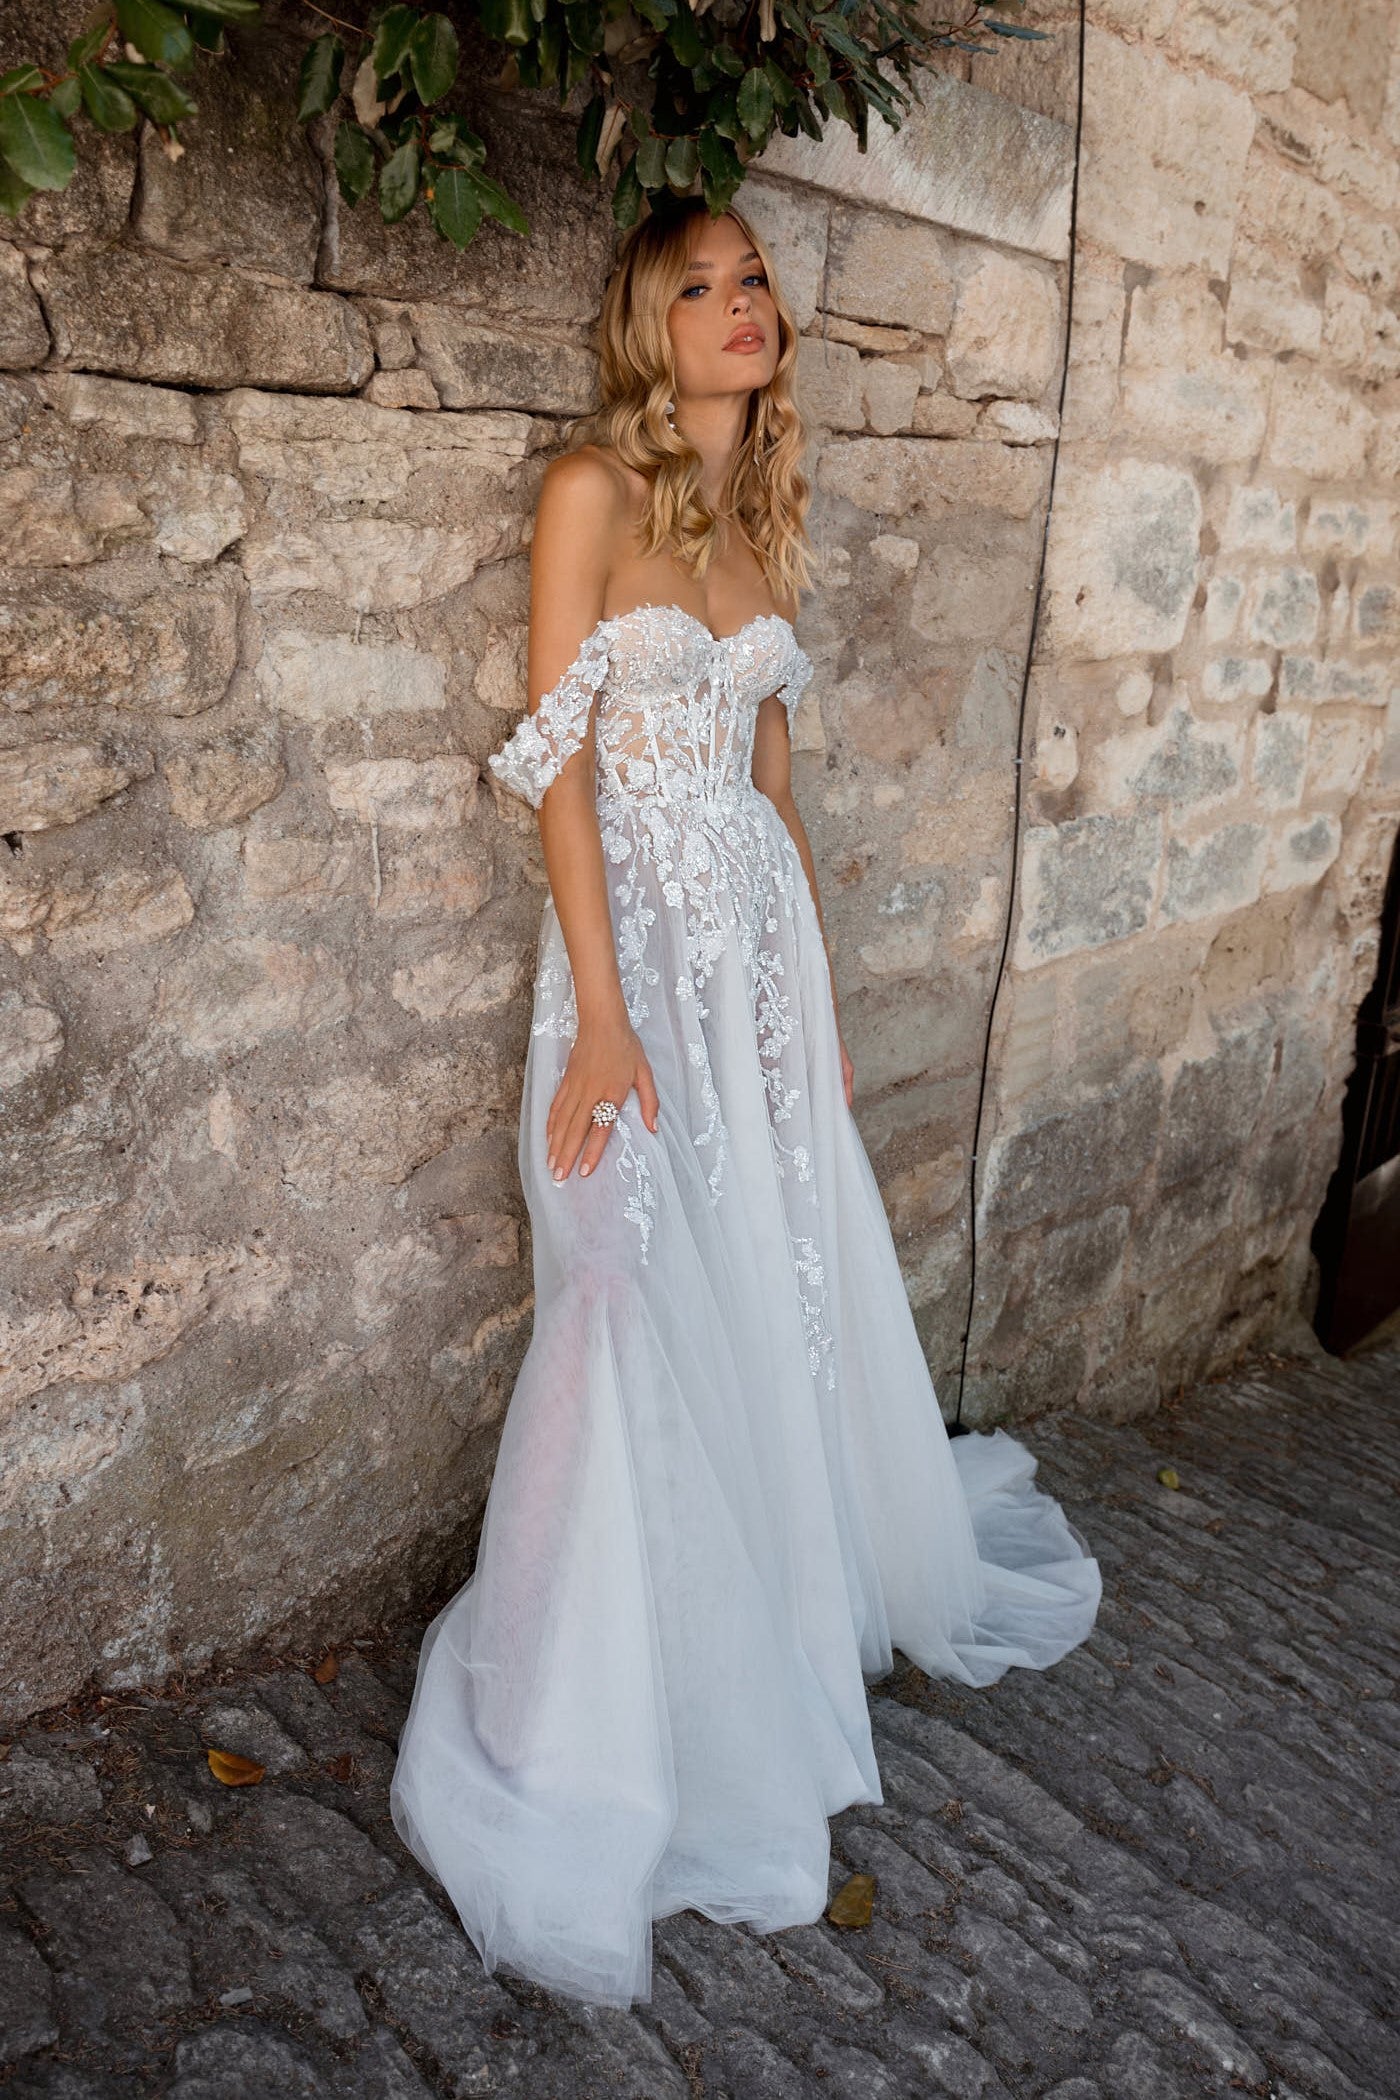 Off-the-Shoulder Corset Wedding Dress with Floral Lace and Gentle White Tulle - Custom Bridal Gown